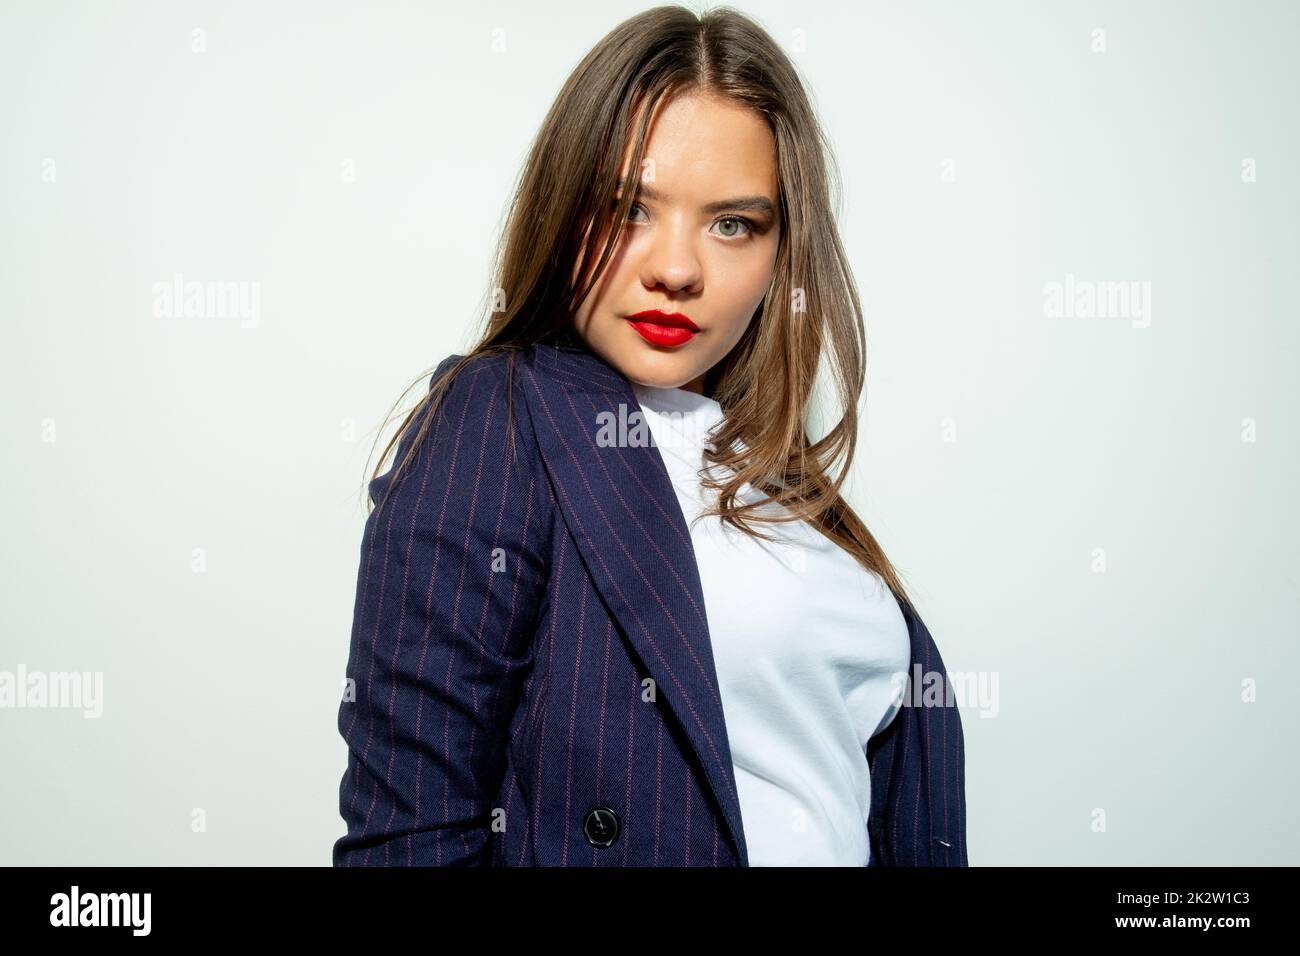 Female success. Business fashion. Leadership empowerment. Portrait of ambitious confident smart woman in blue blazer looking at camera isolated on lig Stock Photo